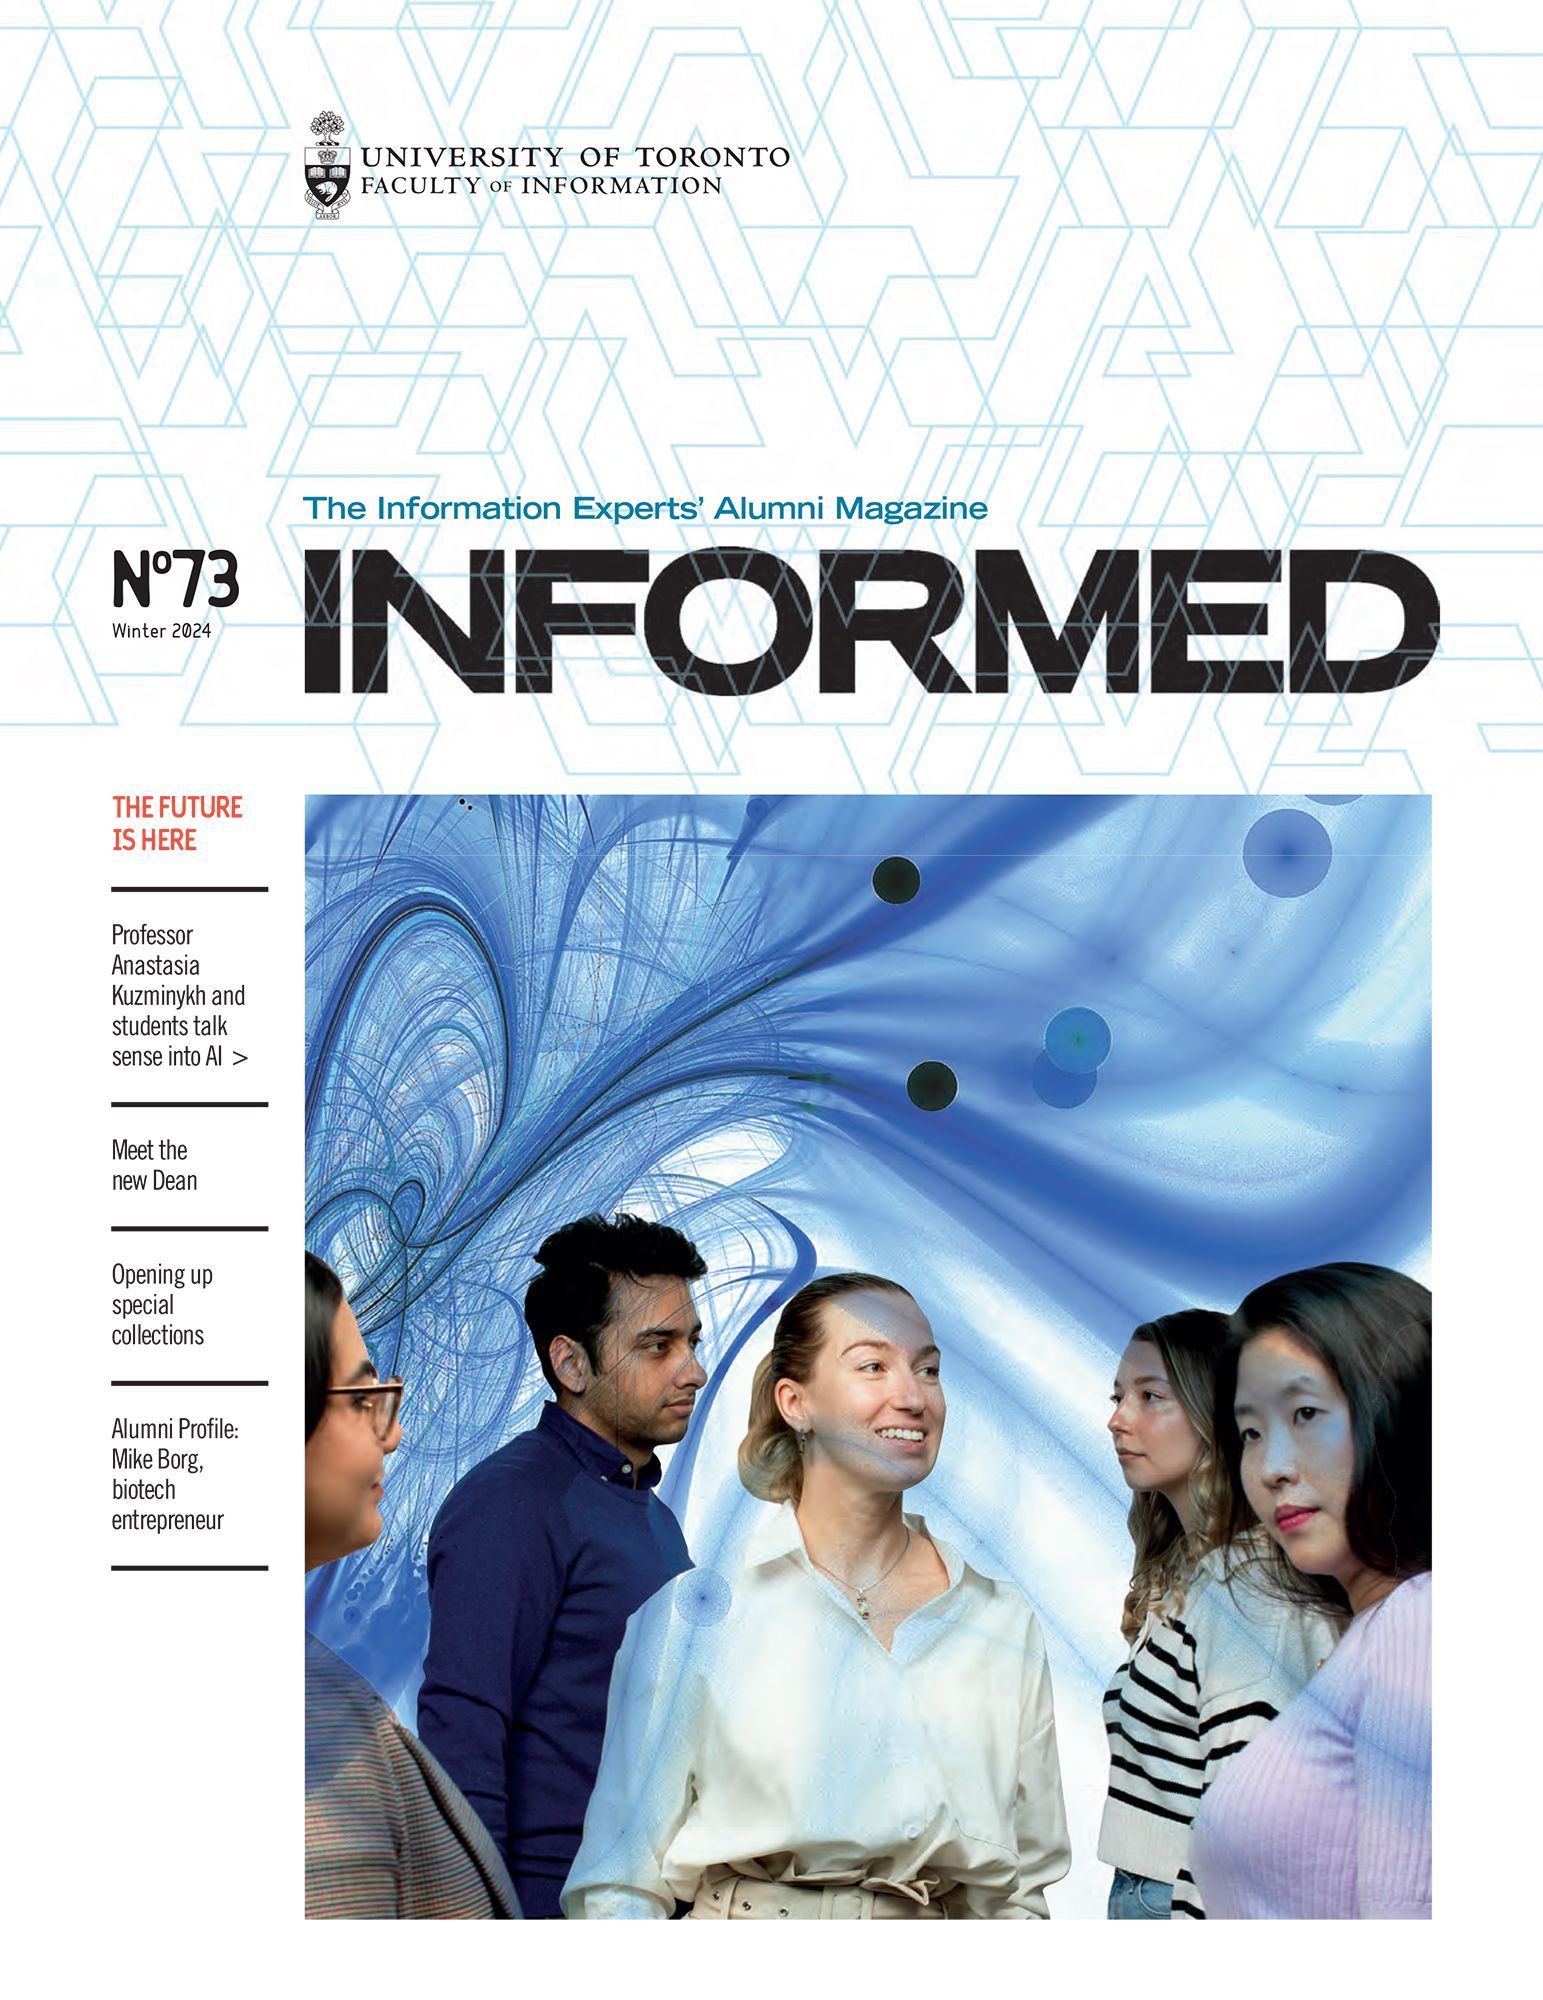  Informed magazine, for the Faculty of Information (iSchool) at University of Toronto. 